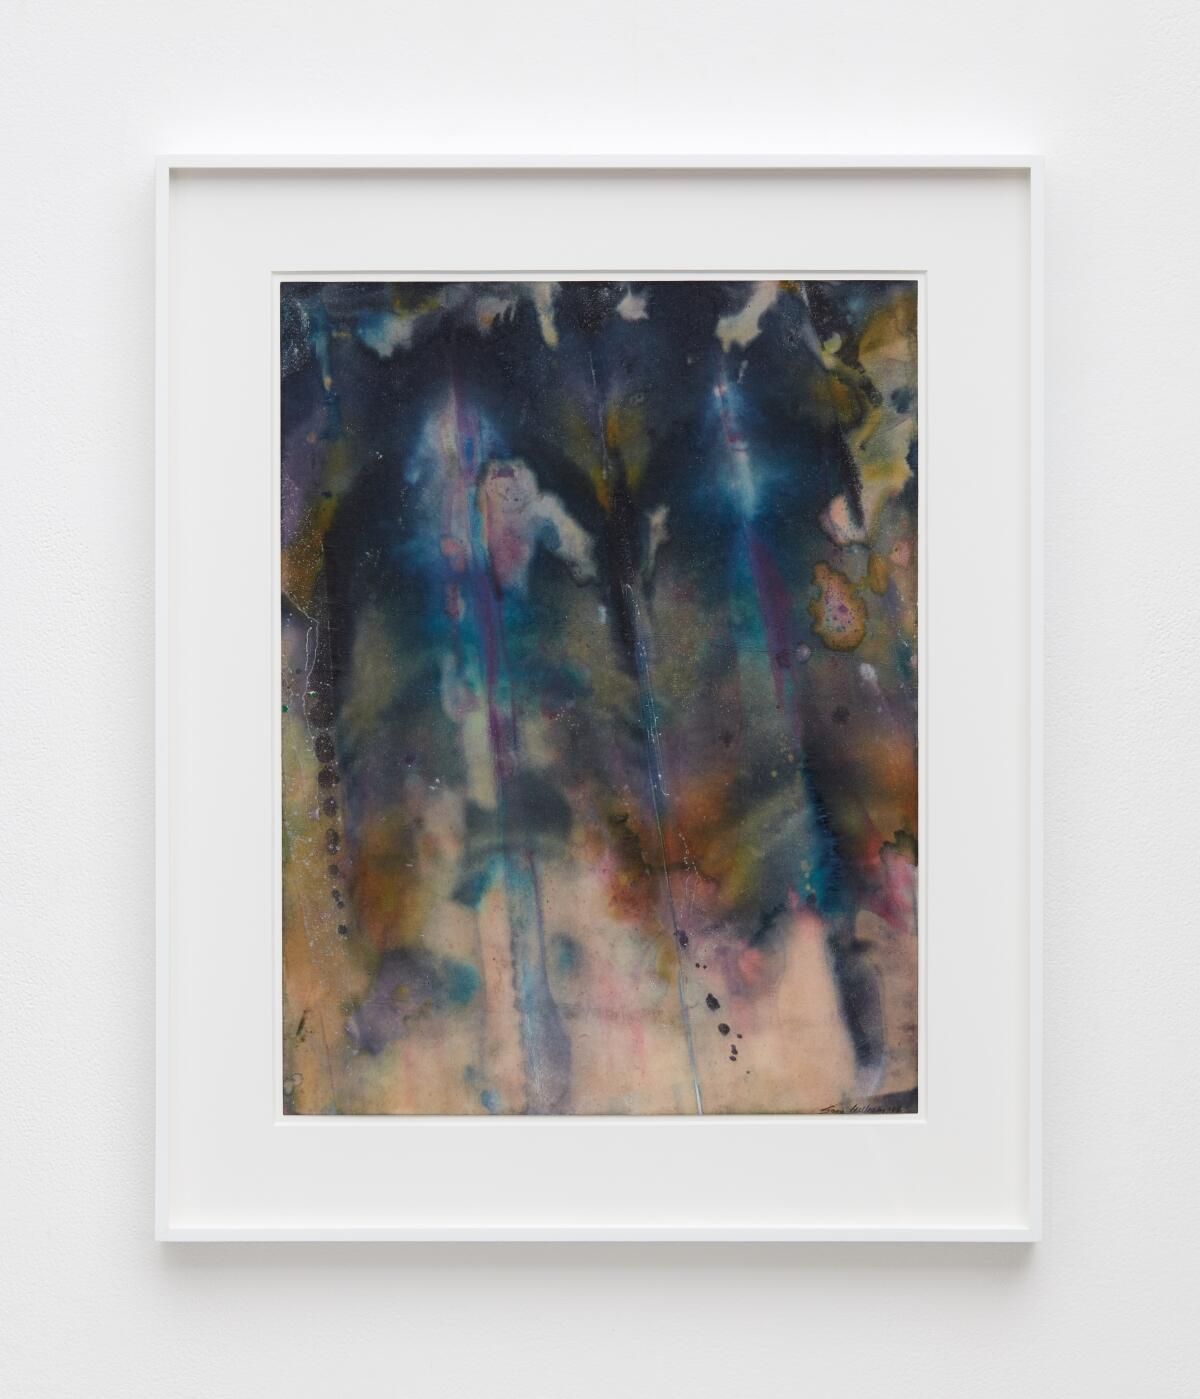 An untitled 1968 watercolor by Washington Color School painter Sam Gilliam is a recent acquisition by the UCLA Hammer Museum.